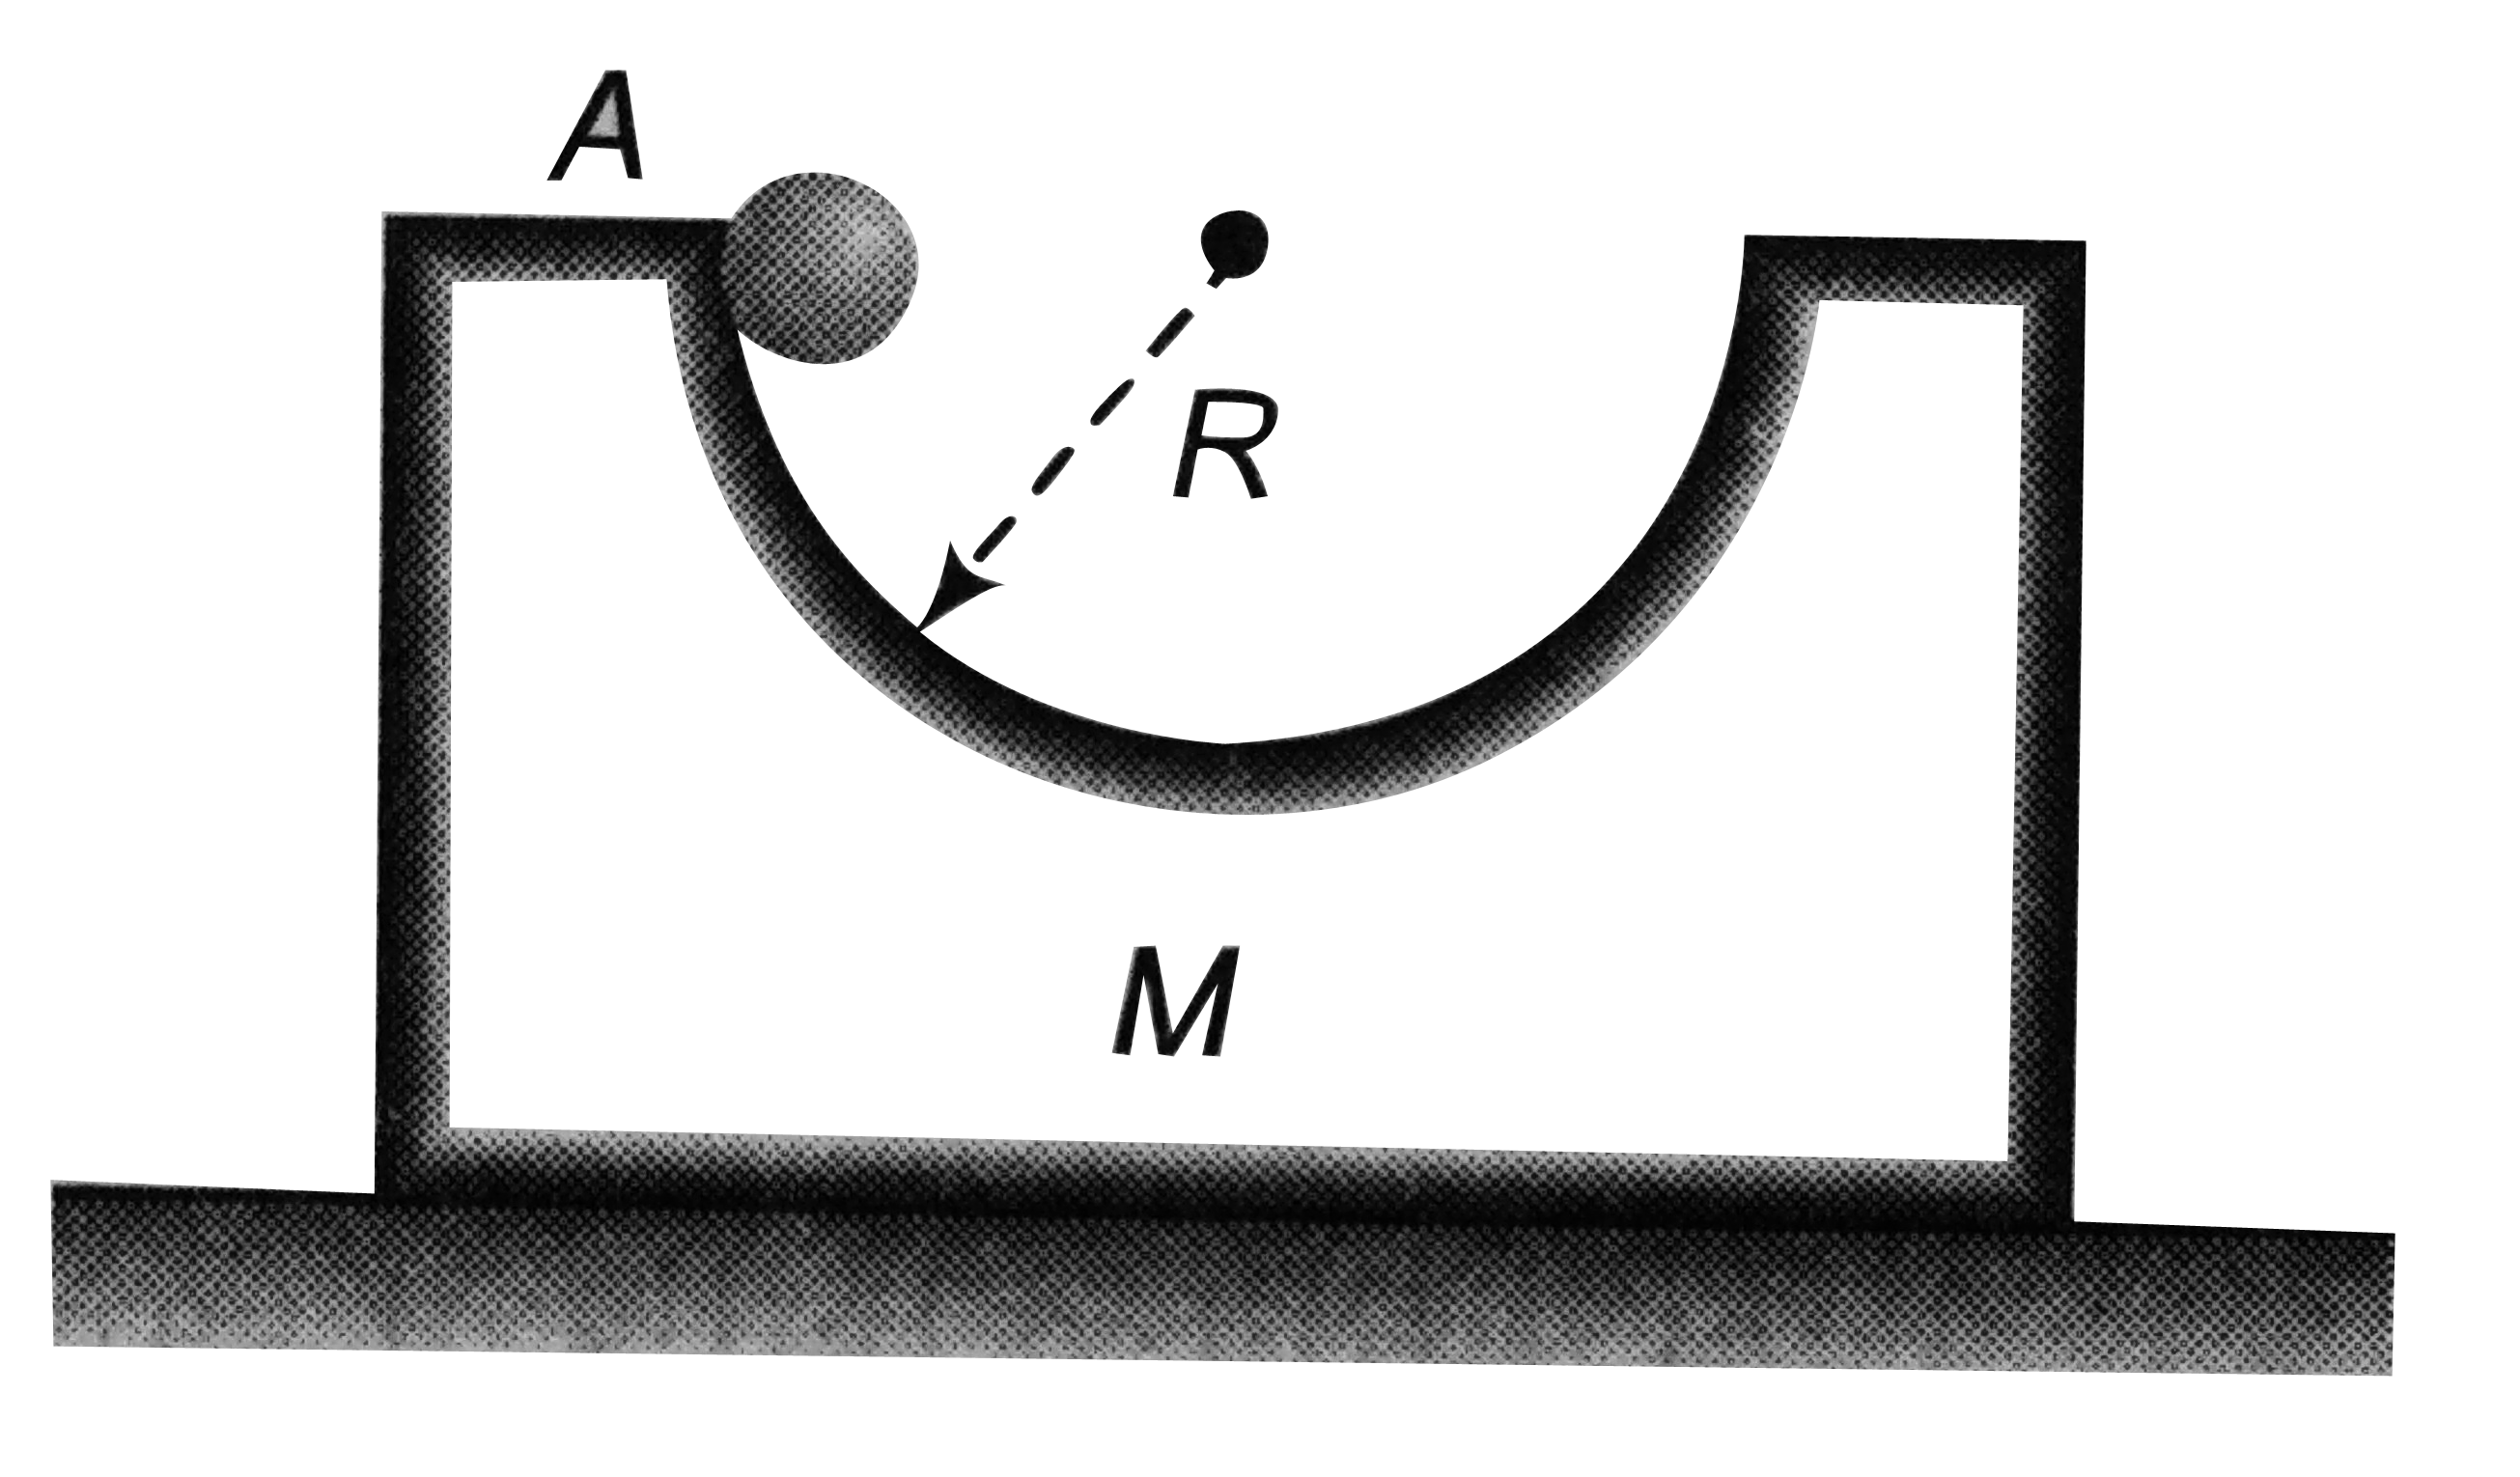 A block of mass M with a semicircular track of radius R rests on a horizontal frictionless surface shown in figure. A uniform cylinder of radius r and mass m is released from rest at the point A. The cylinder slips on the semicircular frictionless track. How far has the block moved when the cylinder reaches the bottom of the track? How fast is the block moving when the cylinder reaches the bottom of the track?